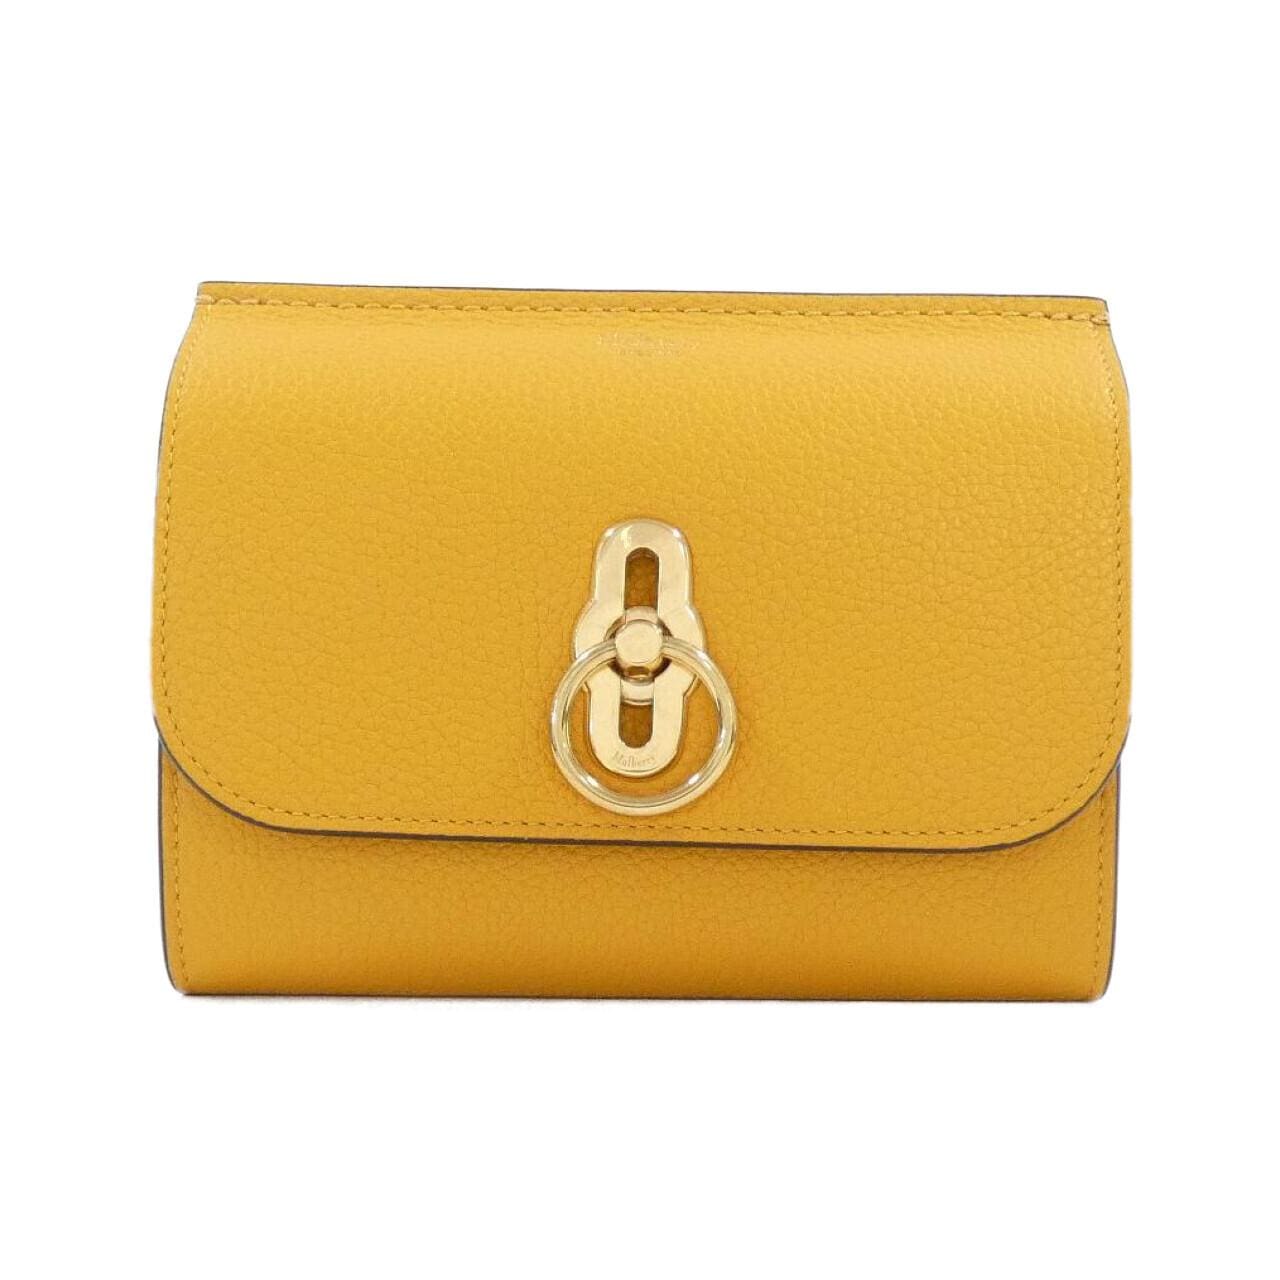 [BRAND NEW] Mulberry Amberley RL6095 205 Wallet